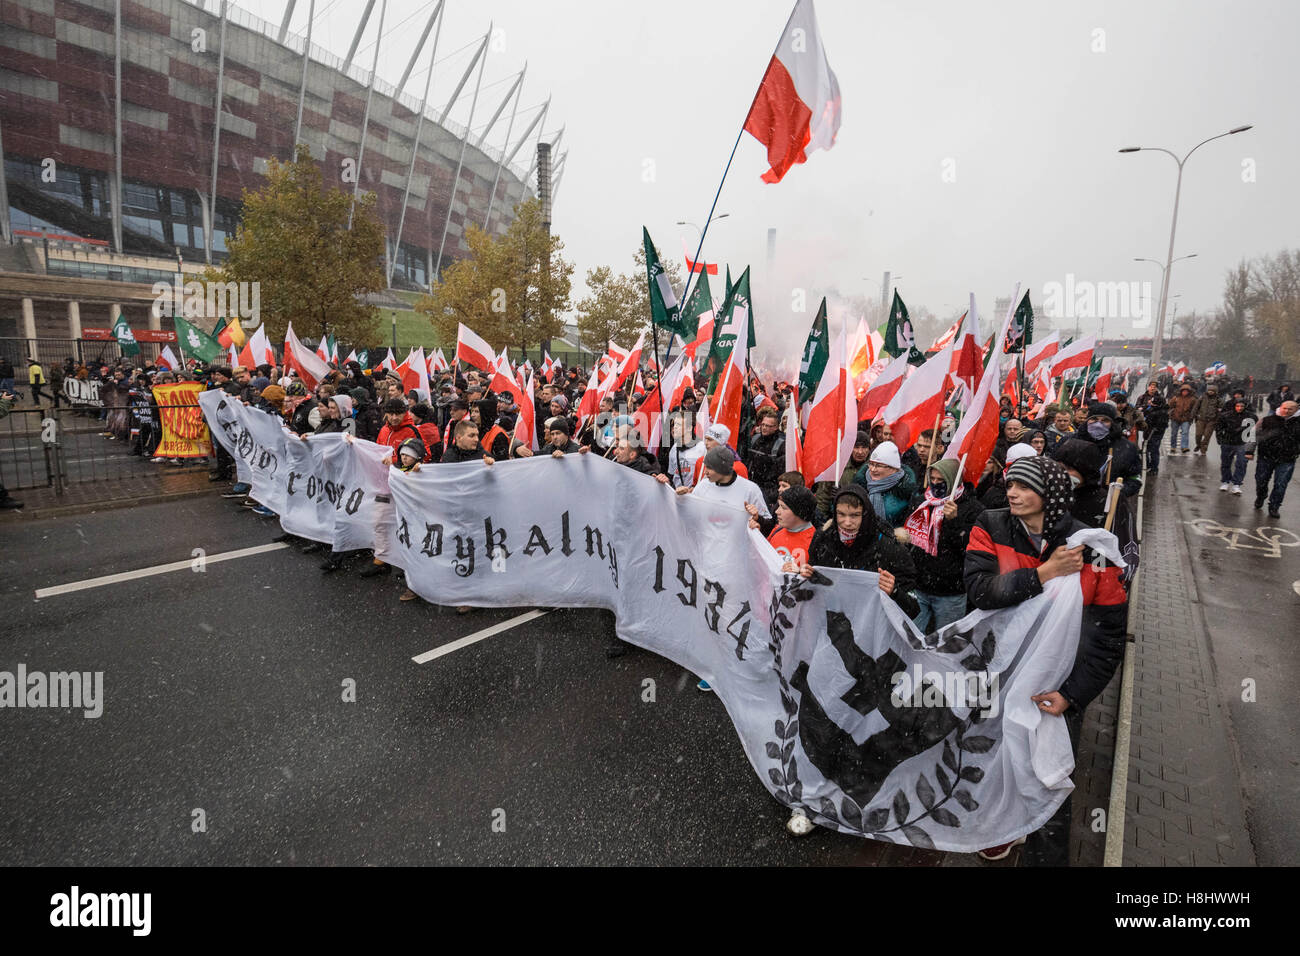 Thousands join the annual march in Warsaw organised by Poland's nationalist right commemorating National Independence Day. Stock Photo